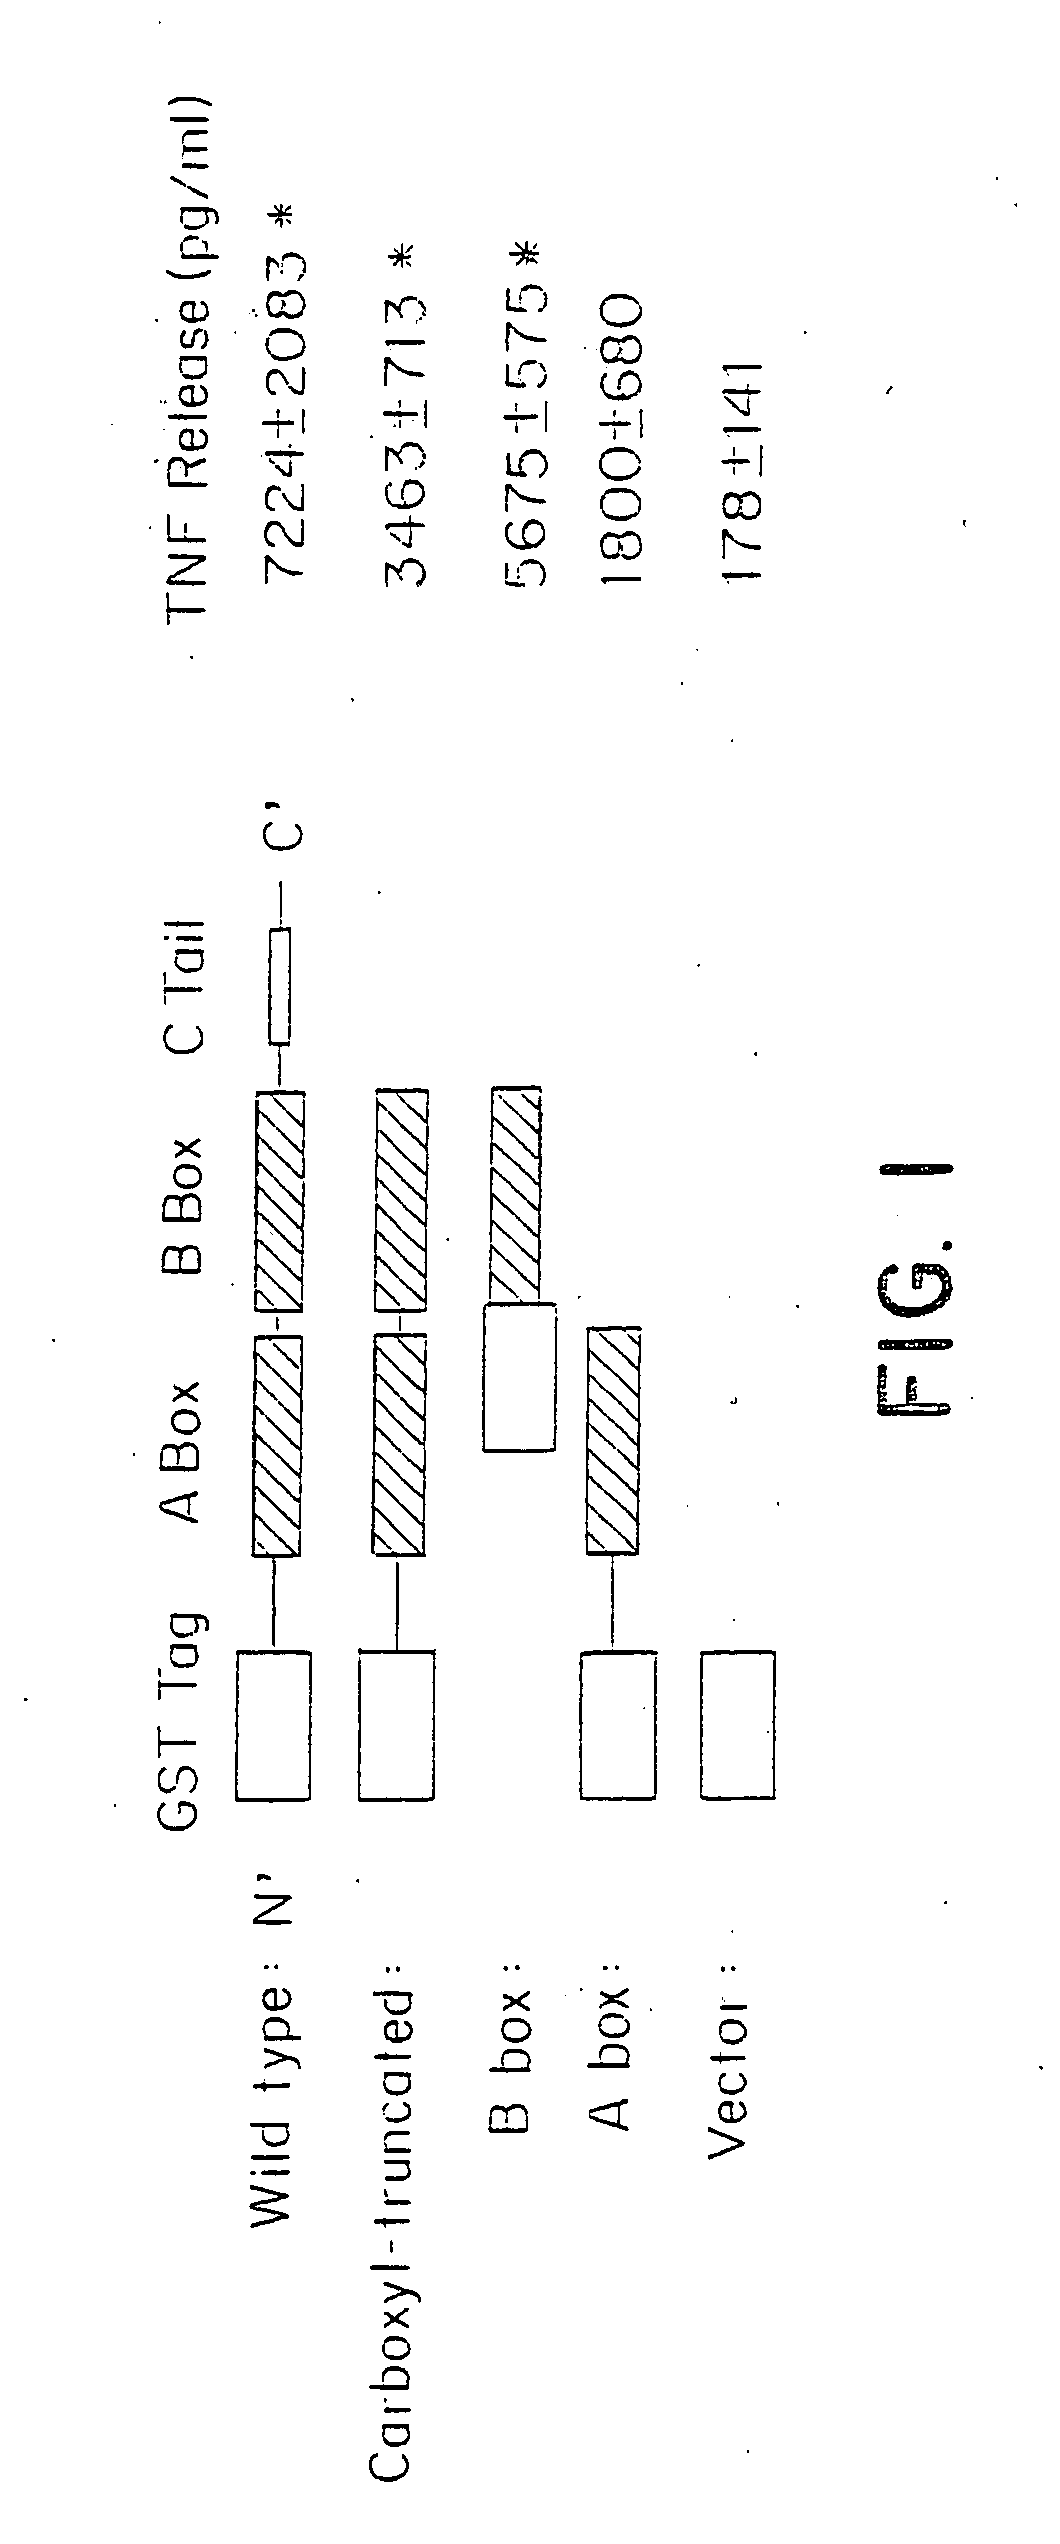 Use of HMGB fragments as anti-inflammatory agents